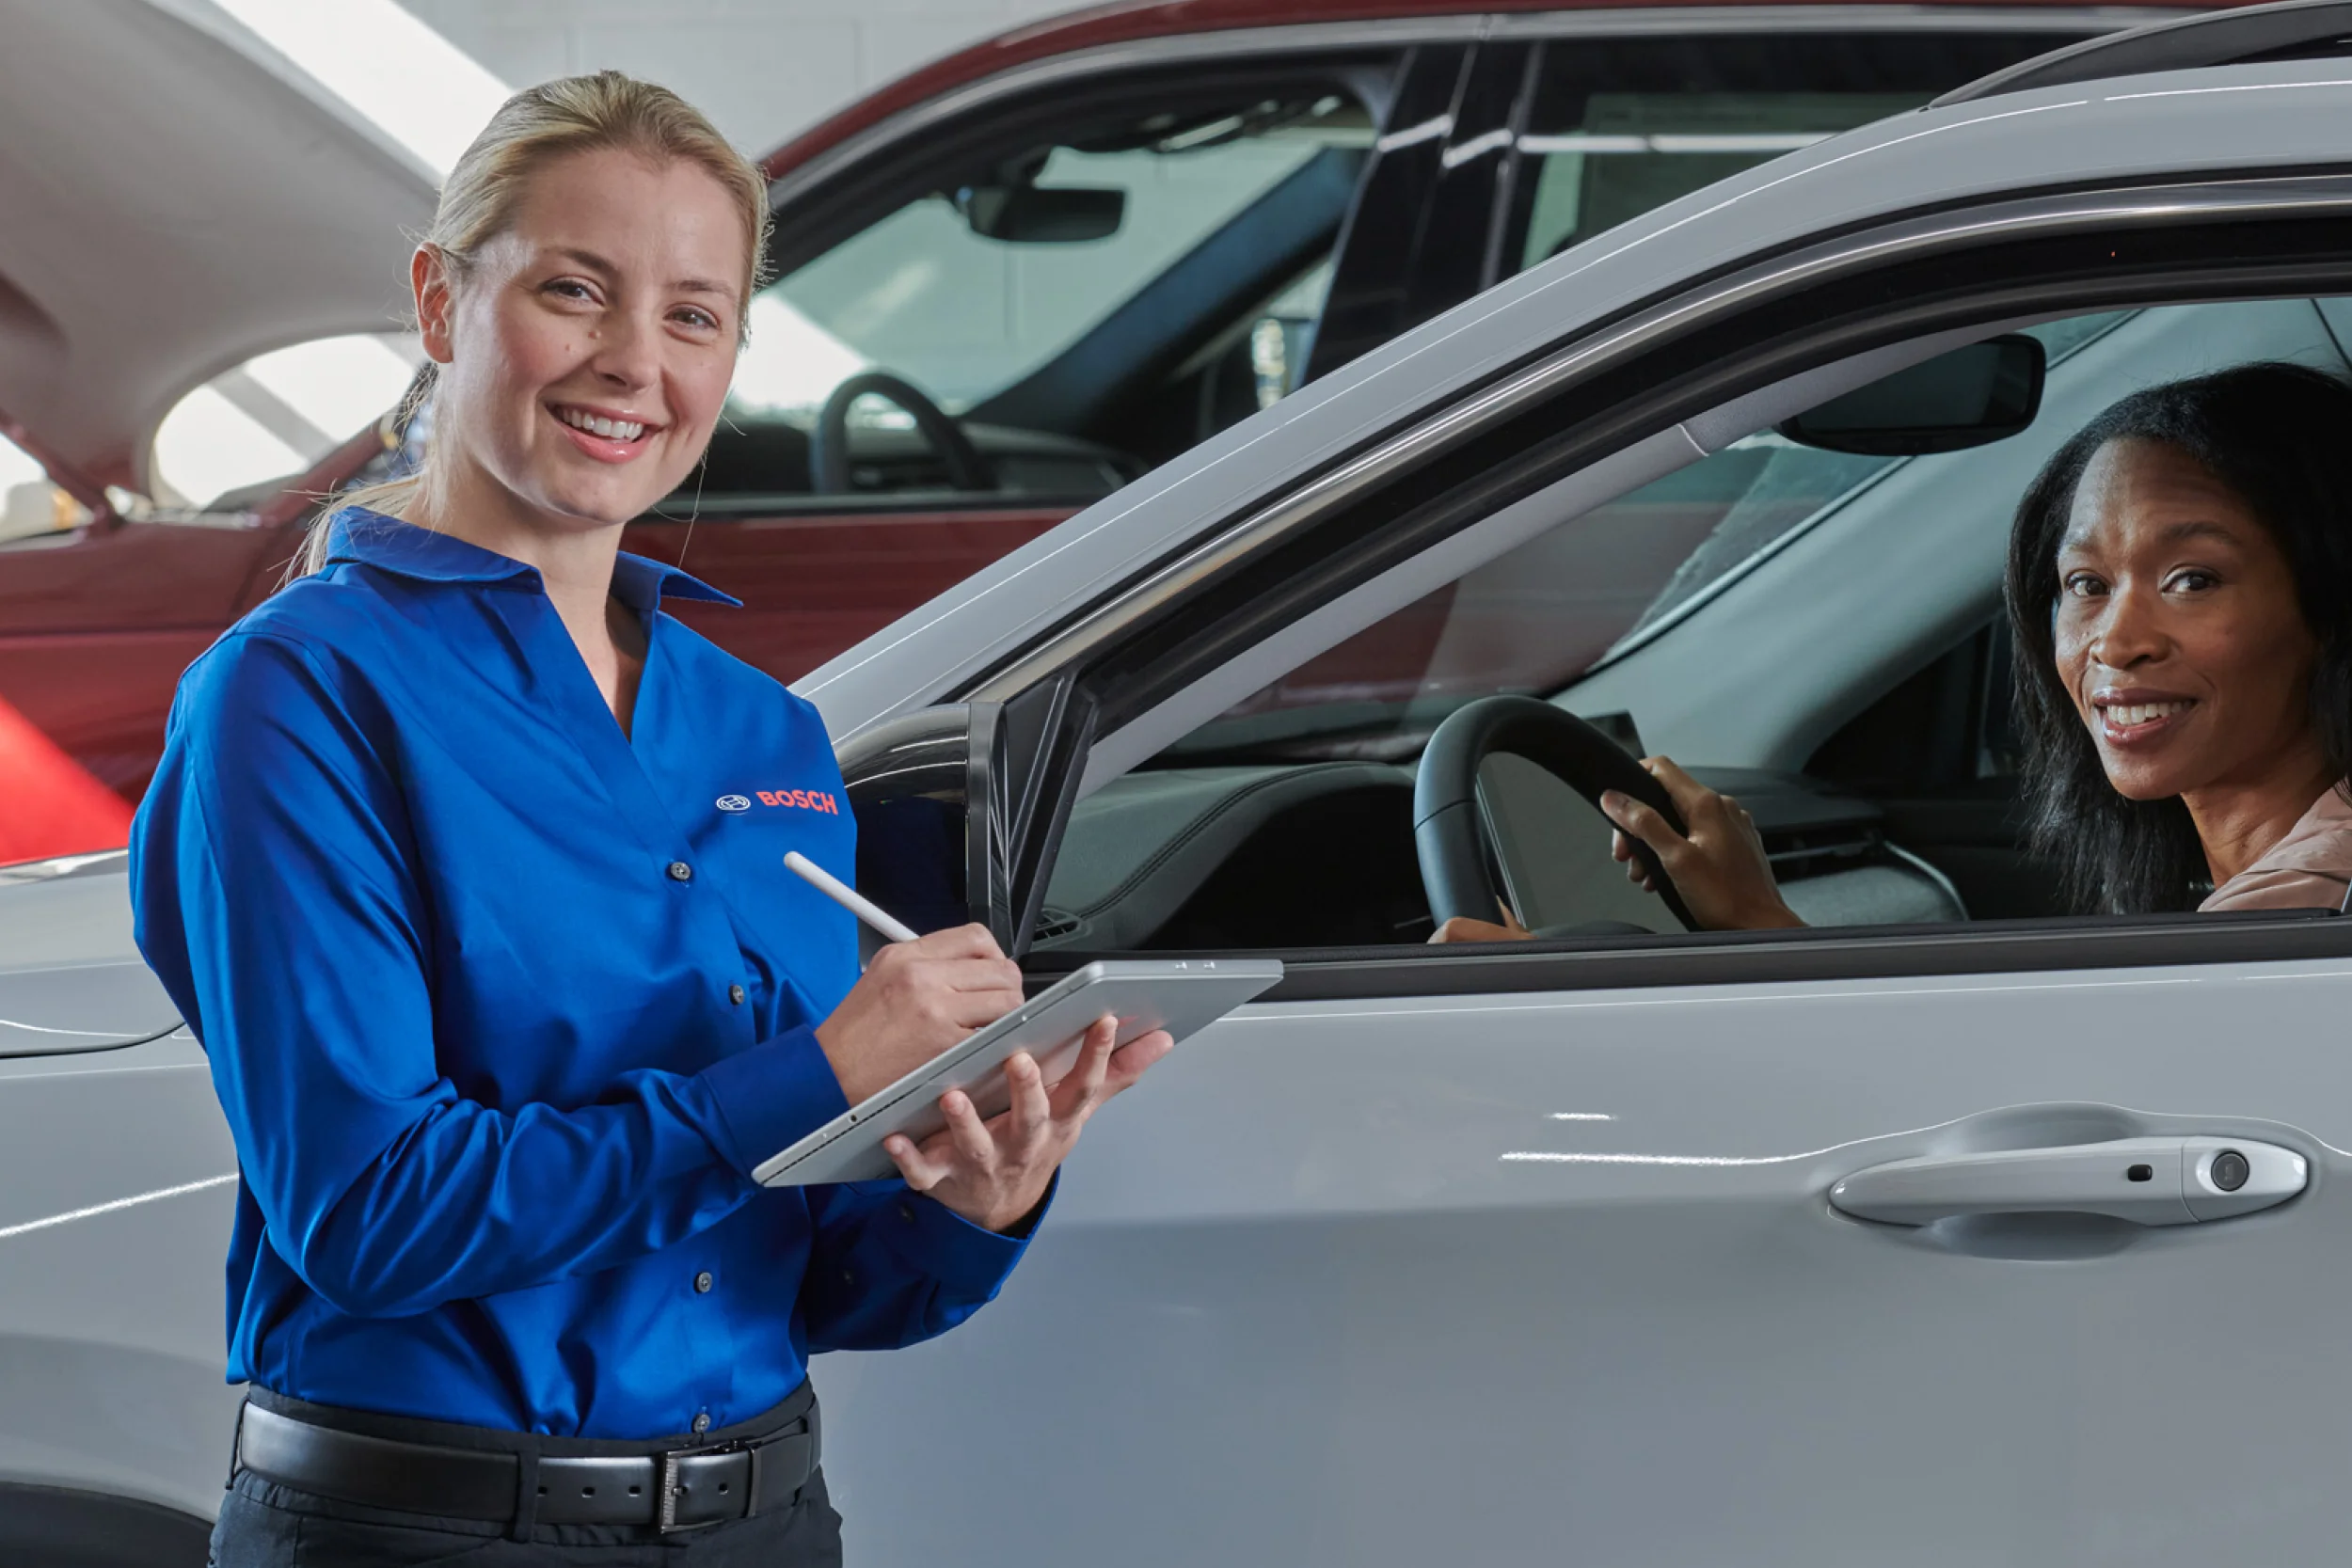 Each Bosch Auto Service repair shop embraces technology so every customer experiences modern convenience.